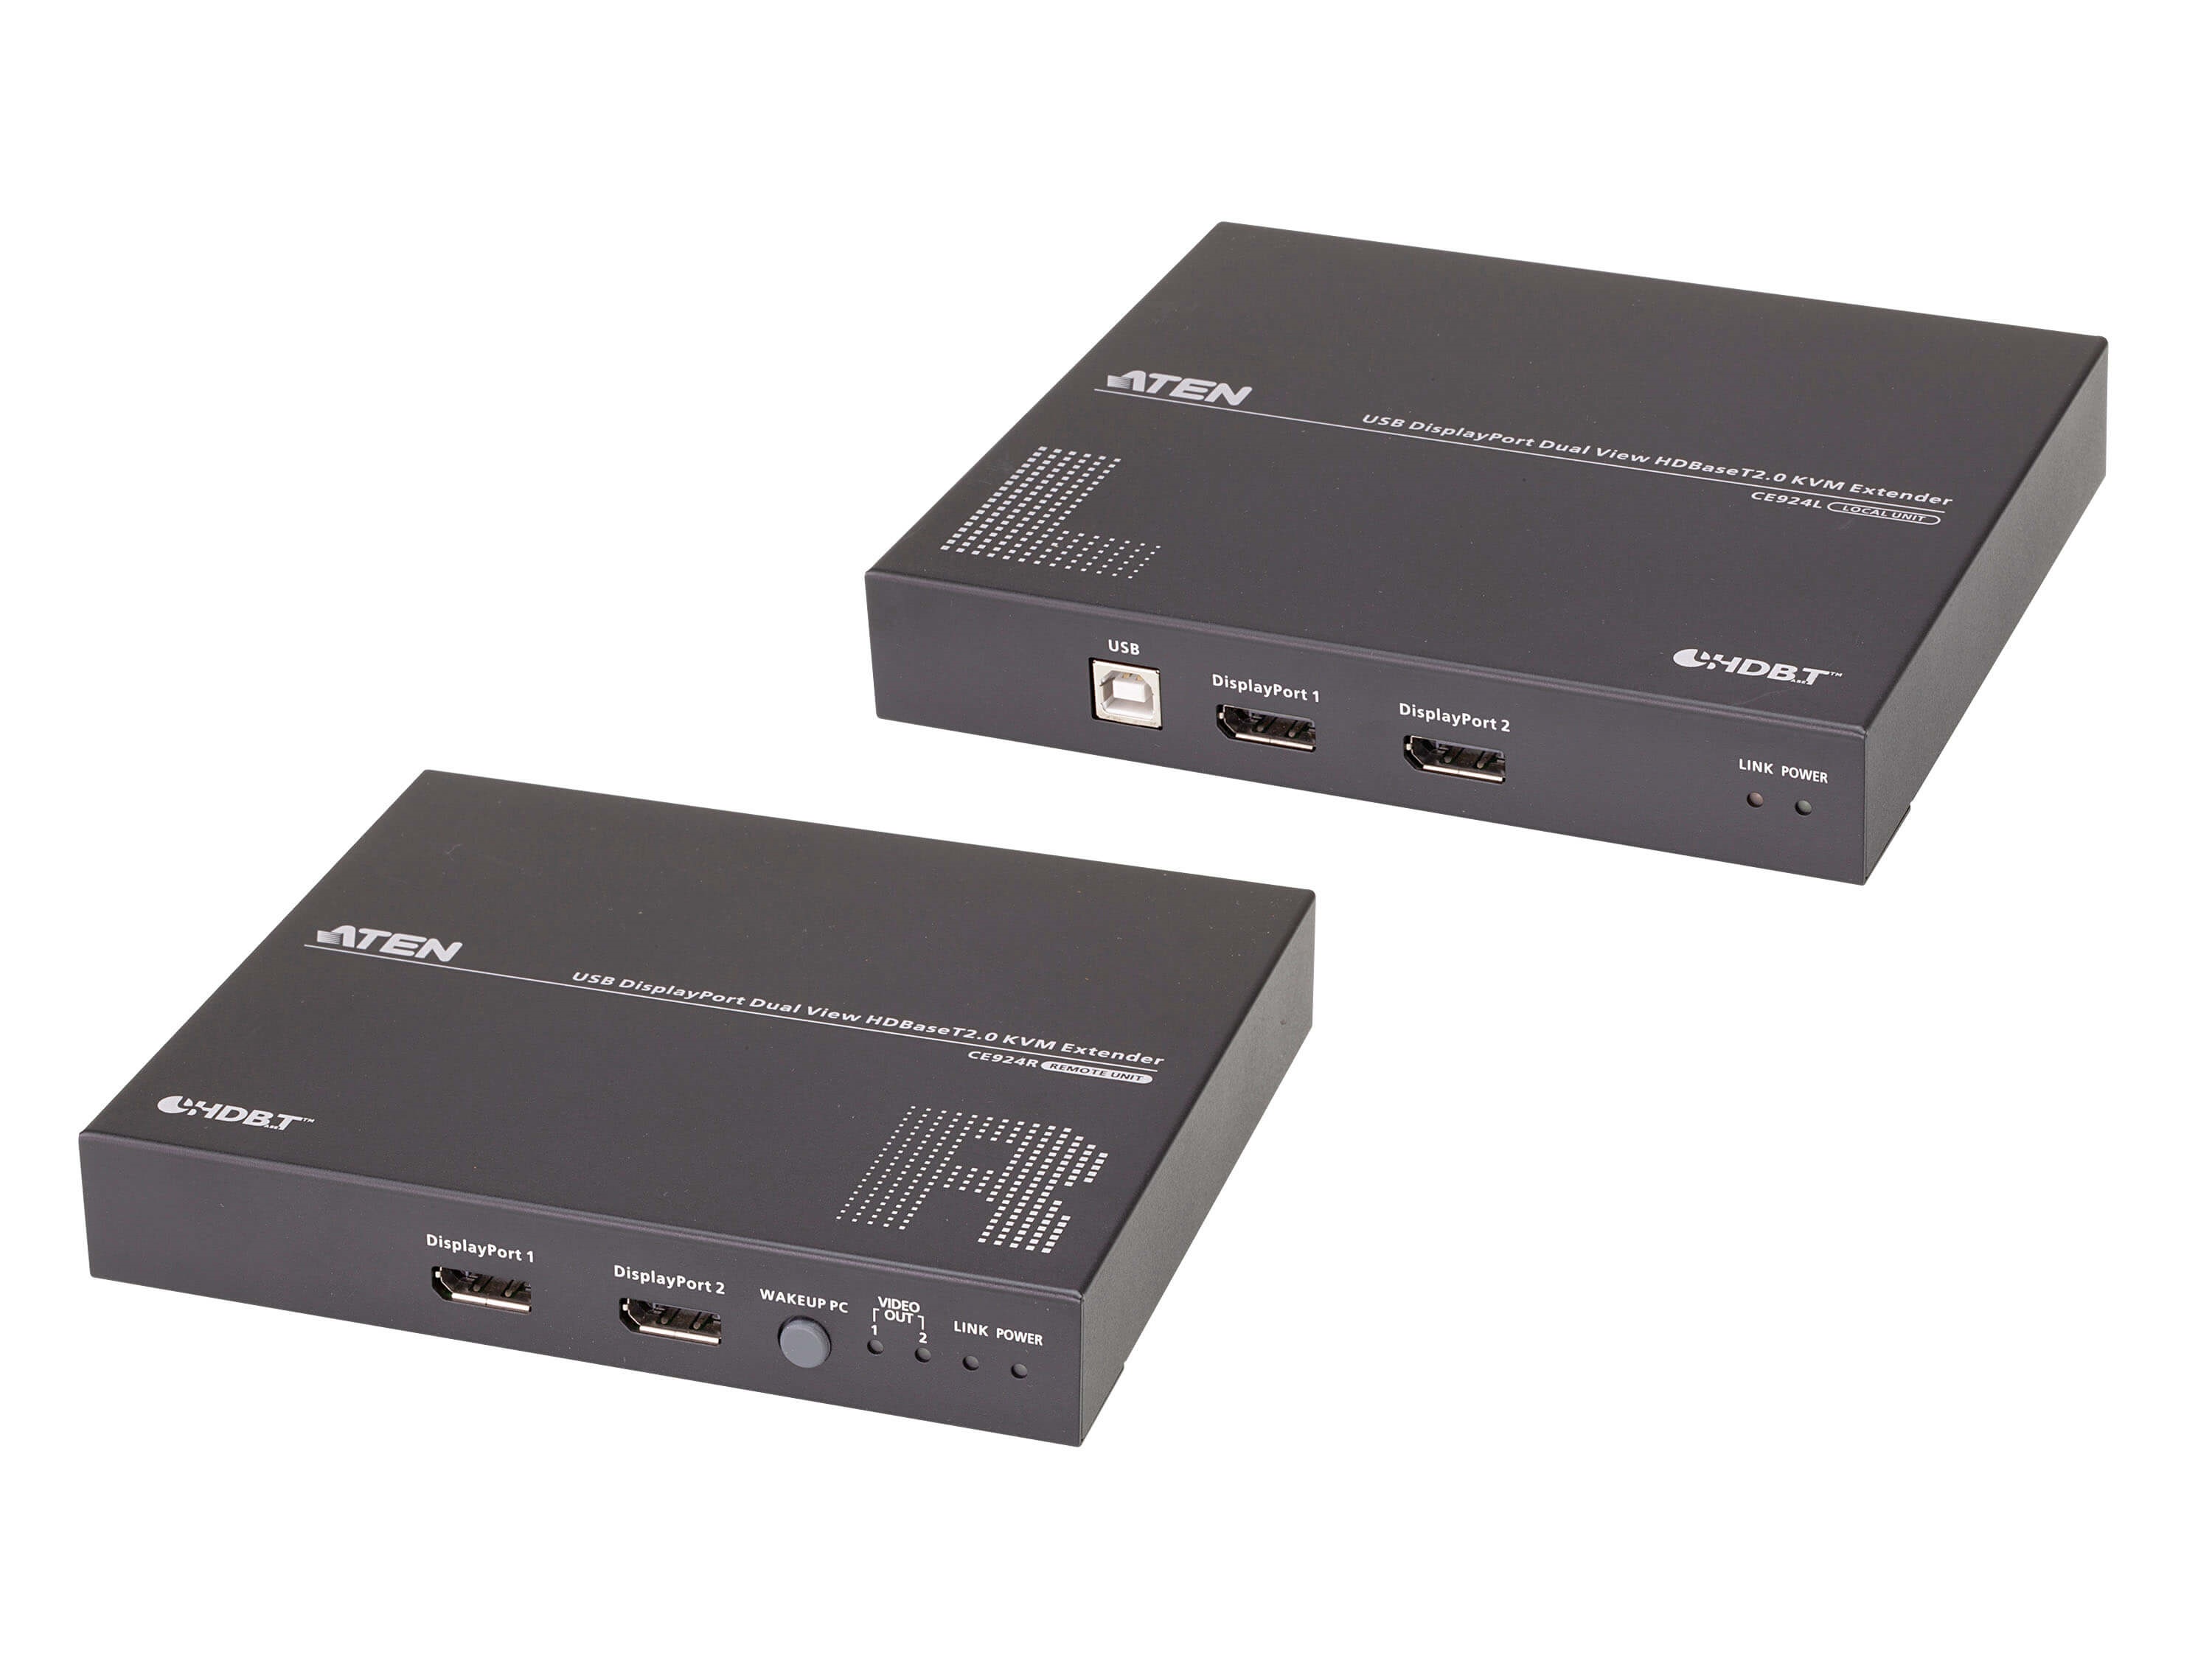 CE924 USB DisplayPort Dual View HDBaseT 2.0 KVM Extender (4K/100m for Single View) by Aten